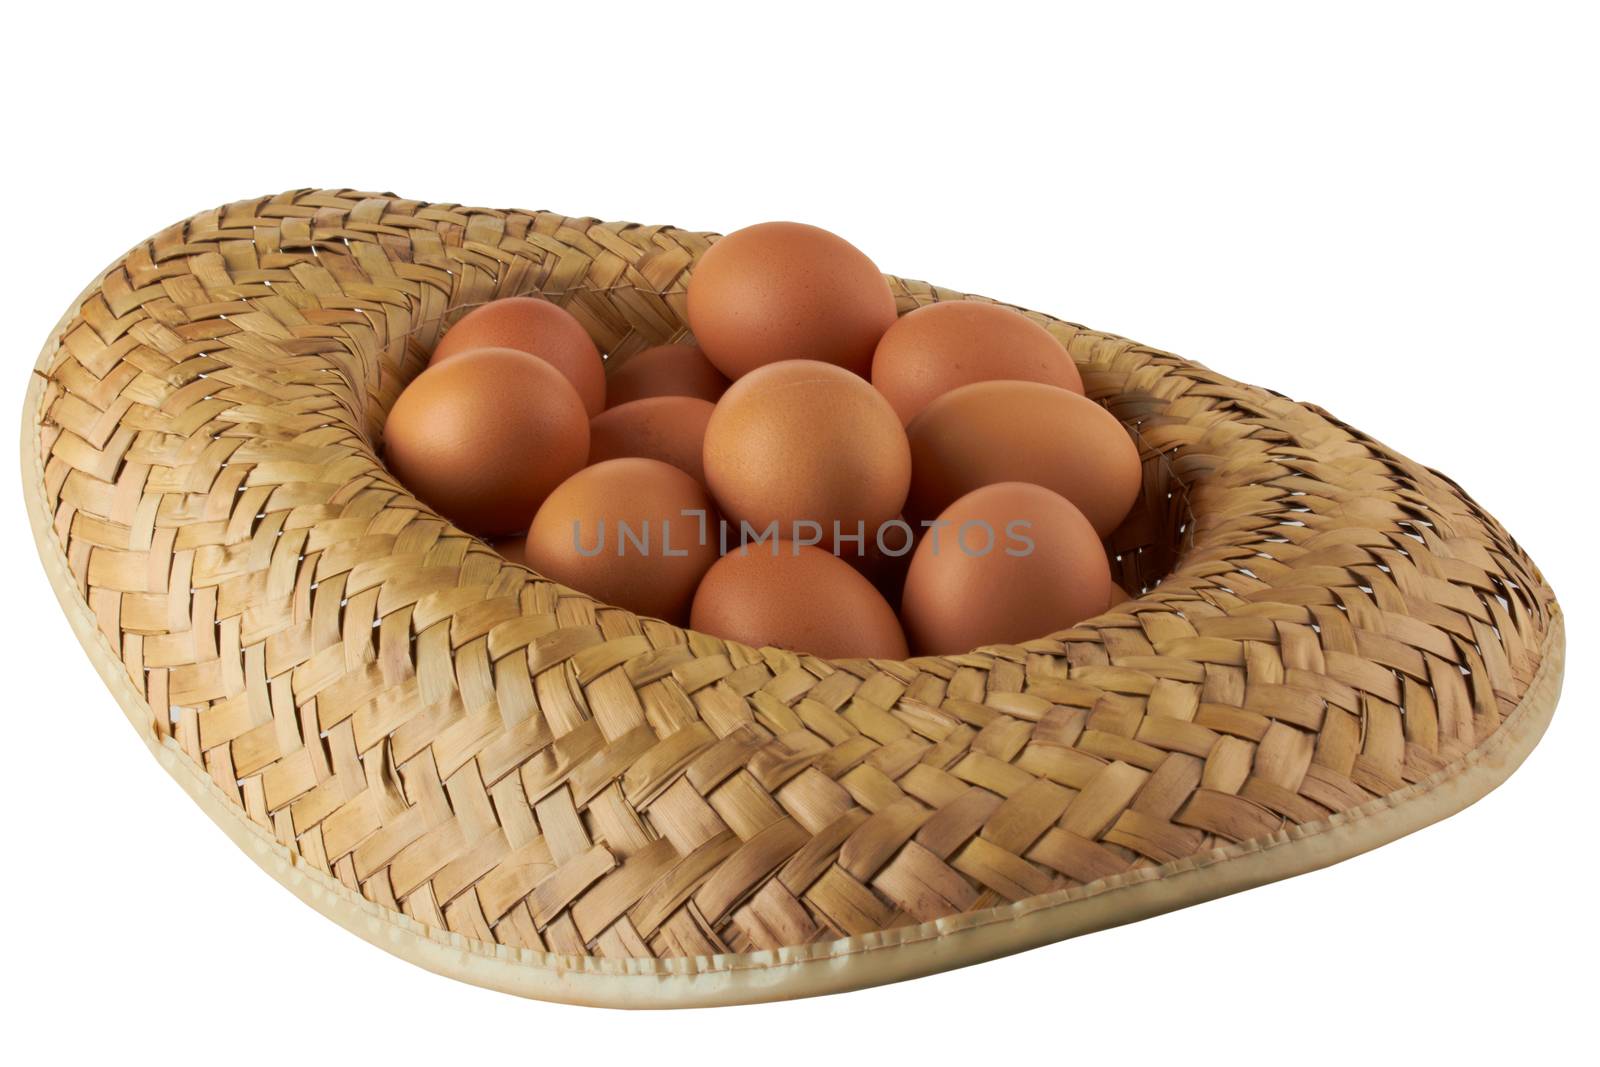 Eggs in a hat is isolated over a white background 